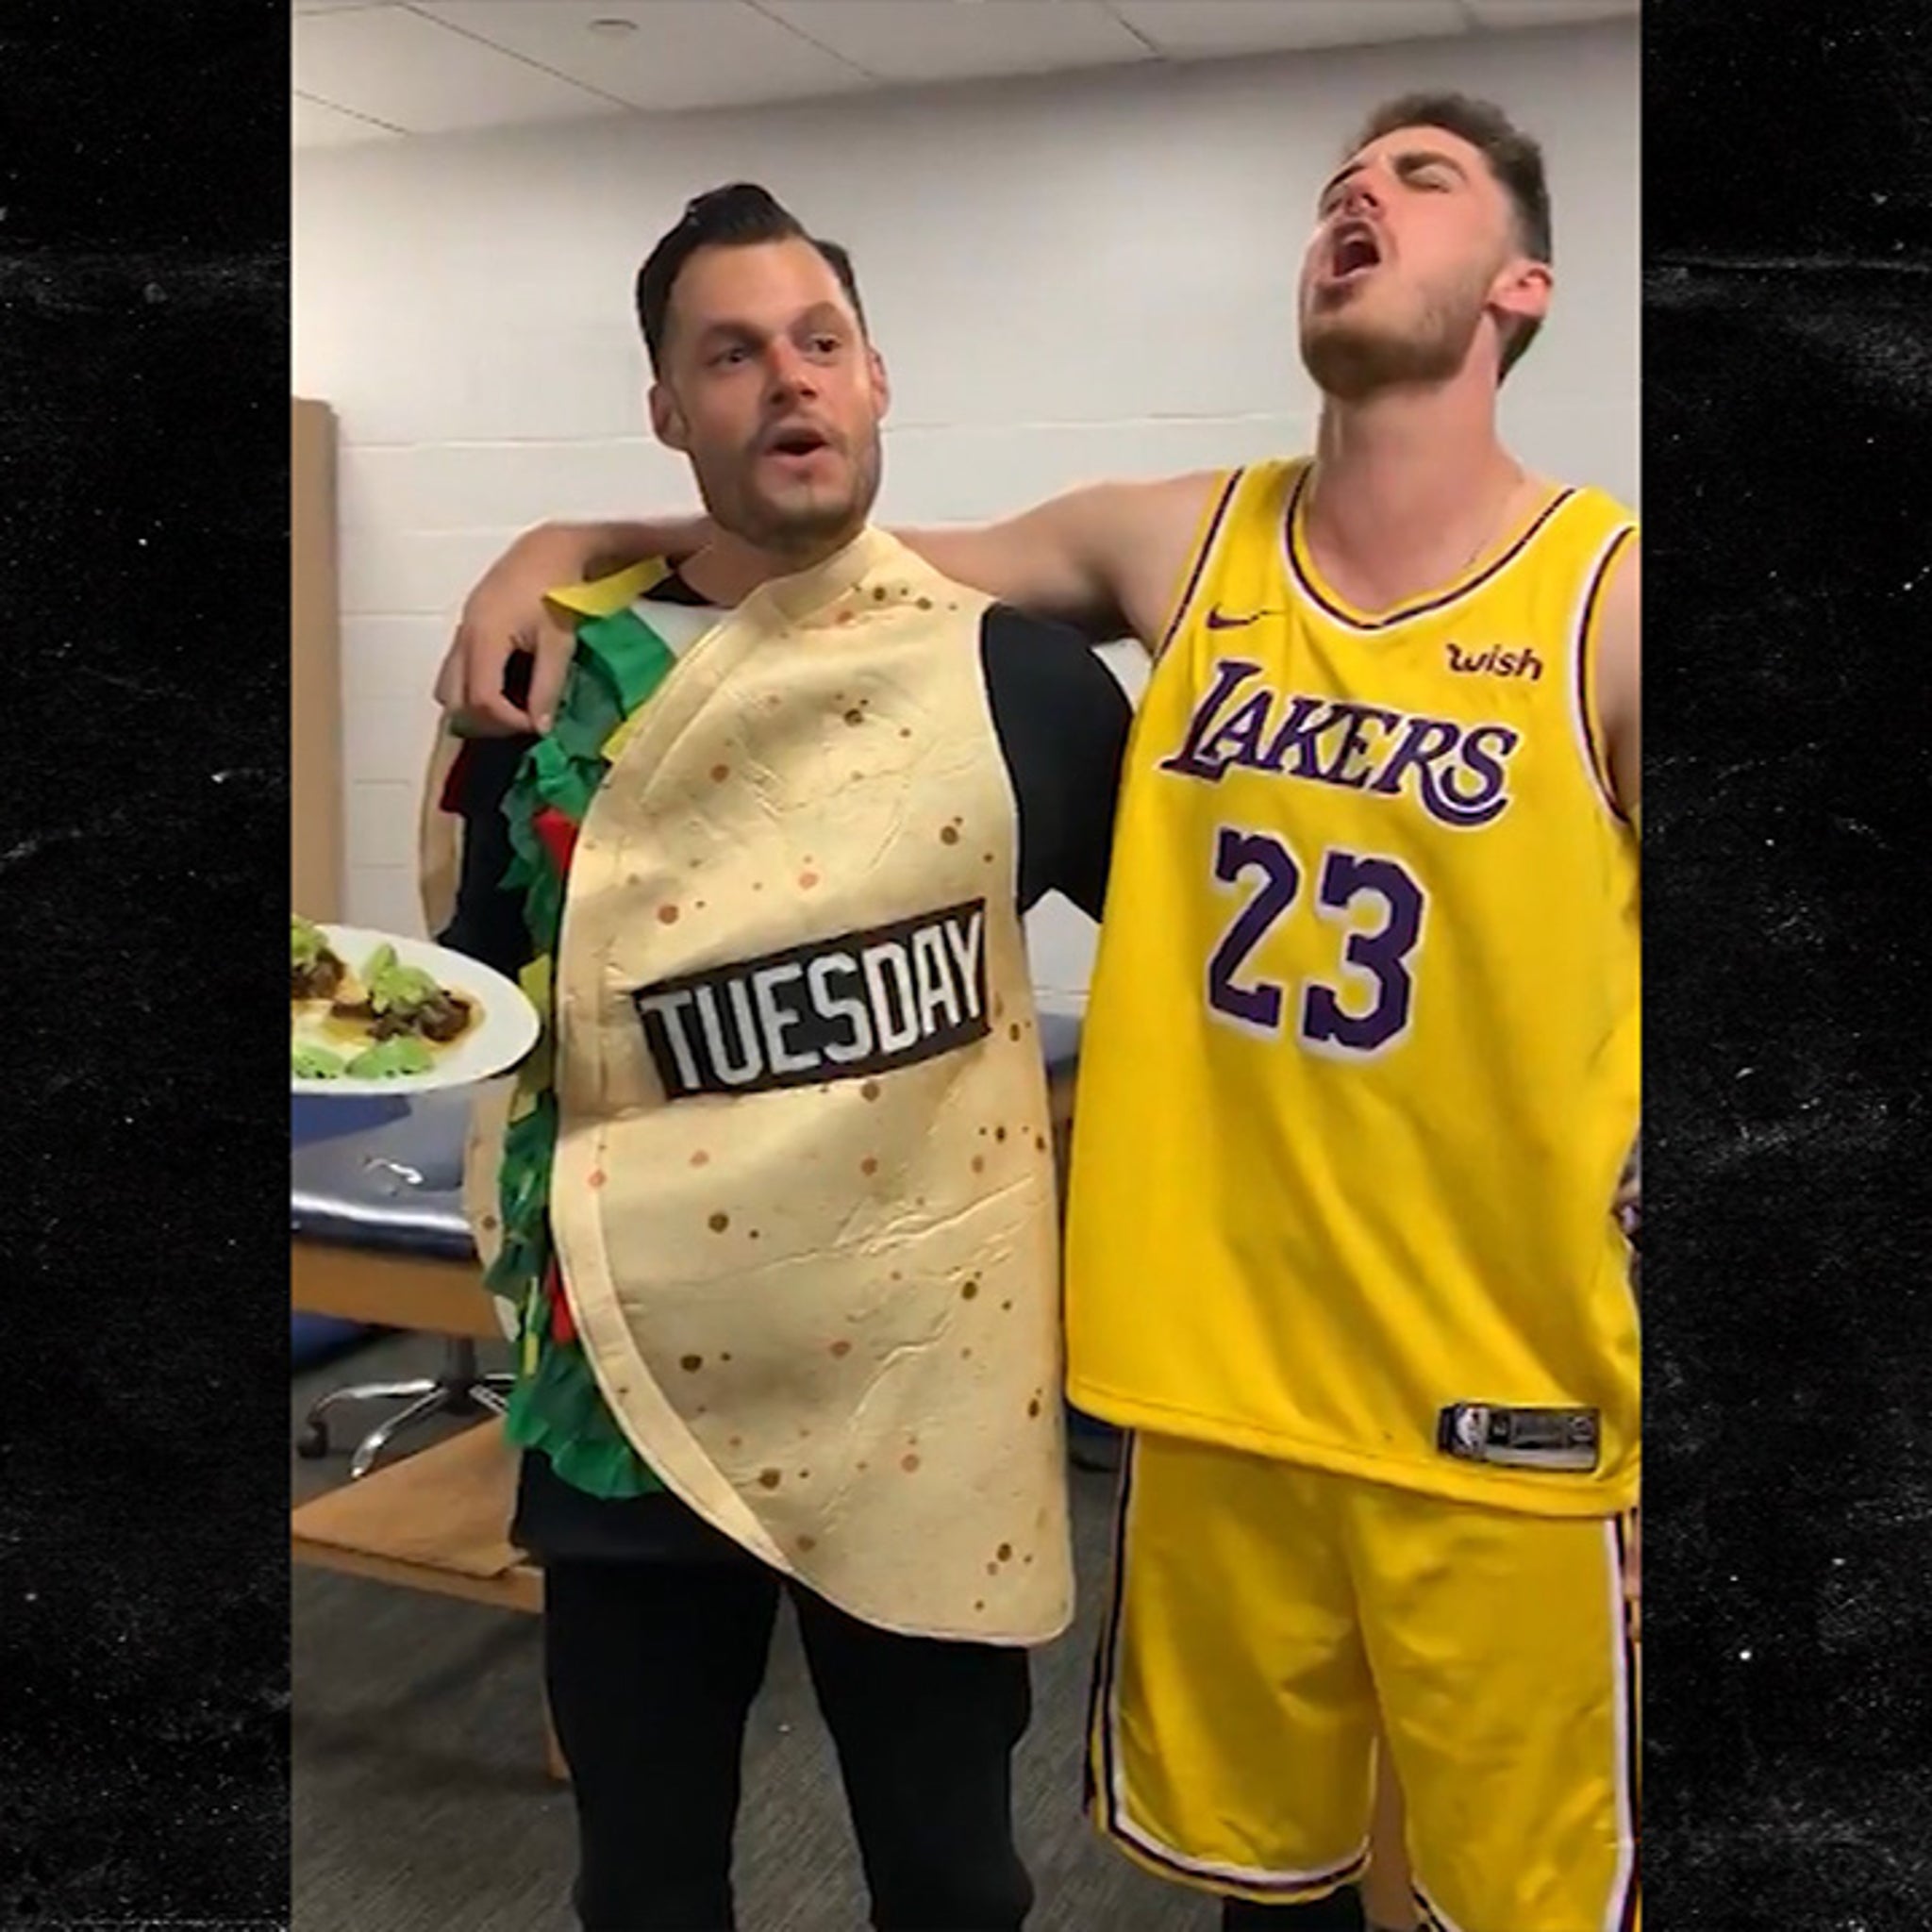 Lakers Video: Cody Bellinger, Joe Kelly Pay Tribute To LeBron